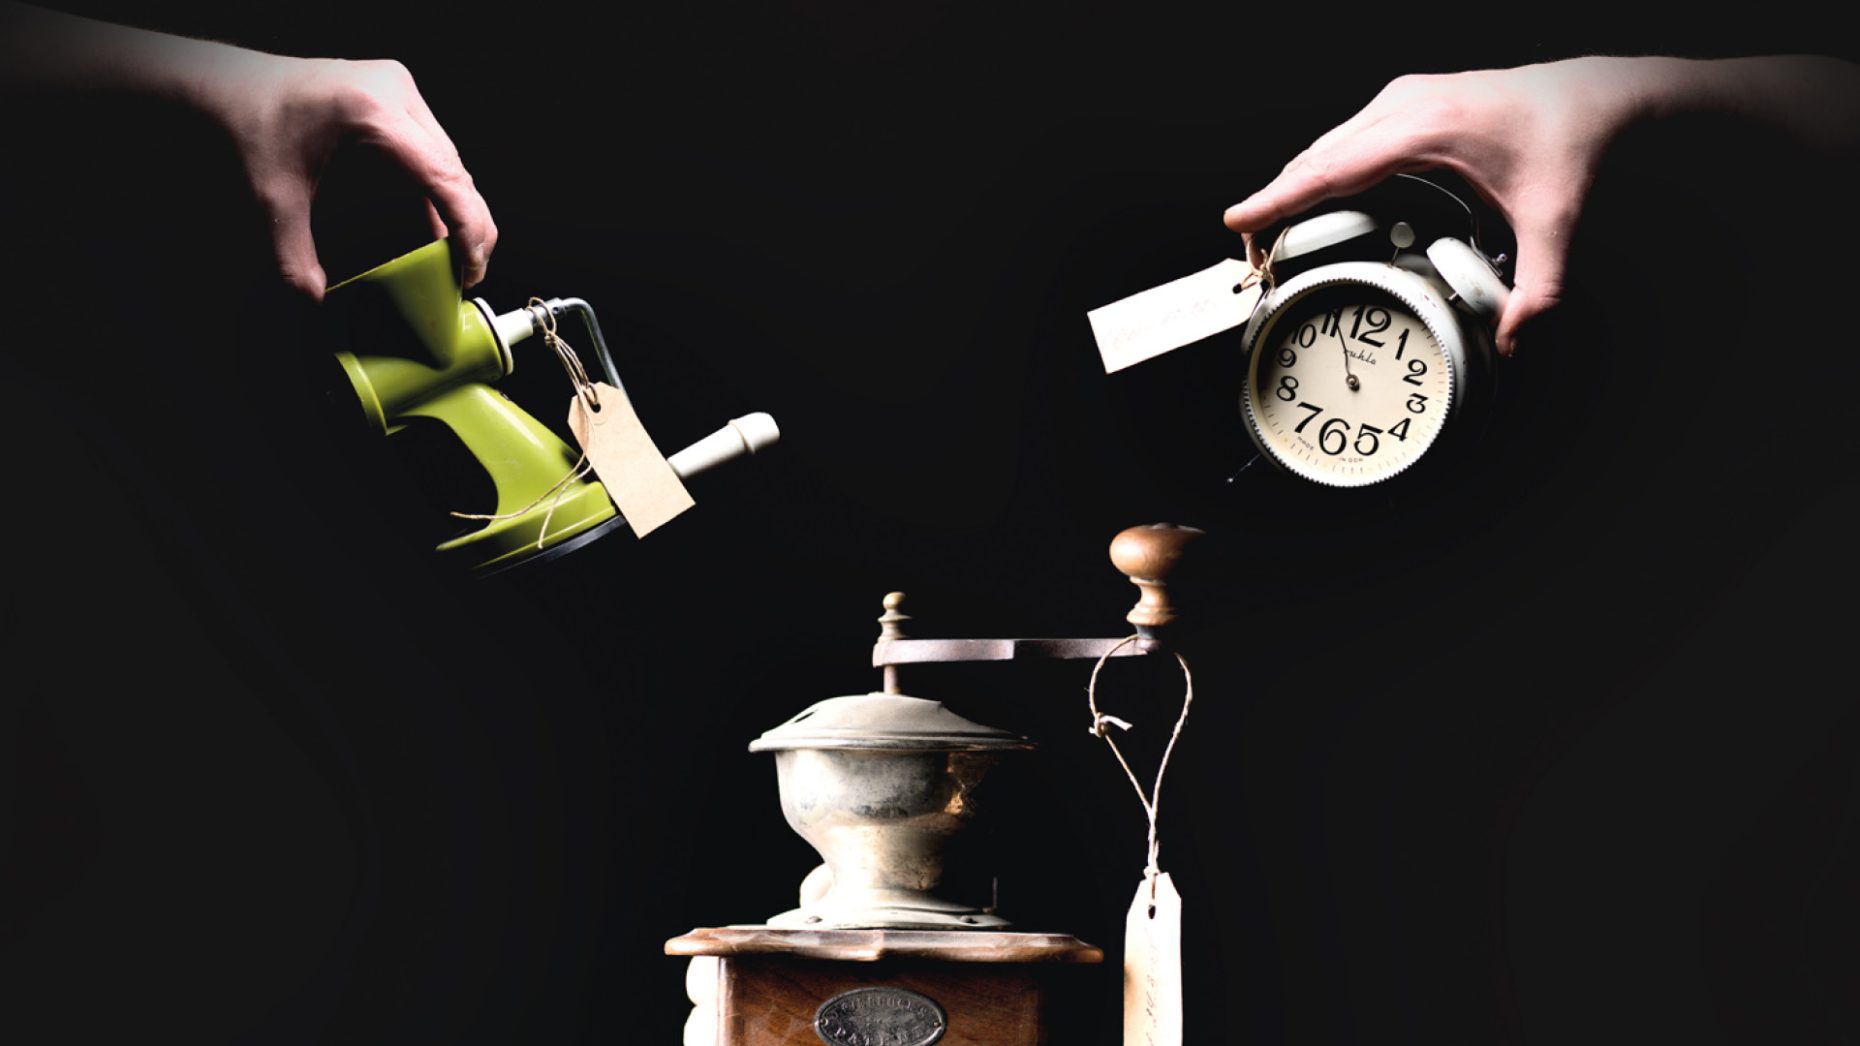 the poster of the show. three old objects are seen: a coffee grinder, an alarm clock and a mincer. each has a tag on it. the latter two are held by hands